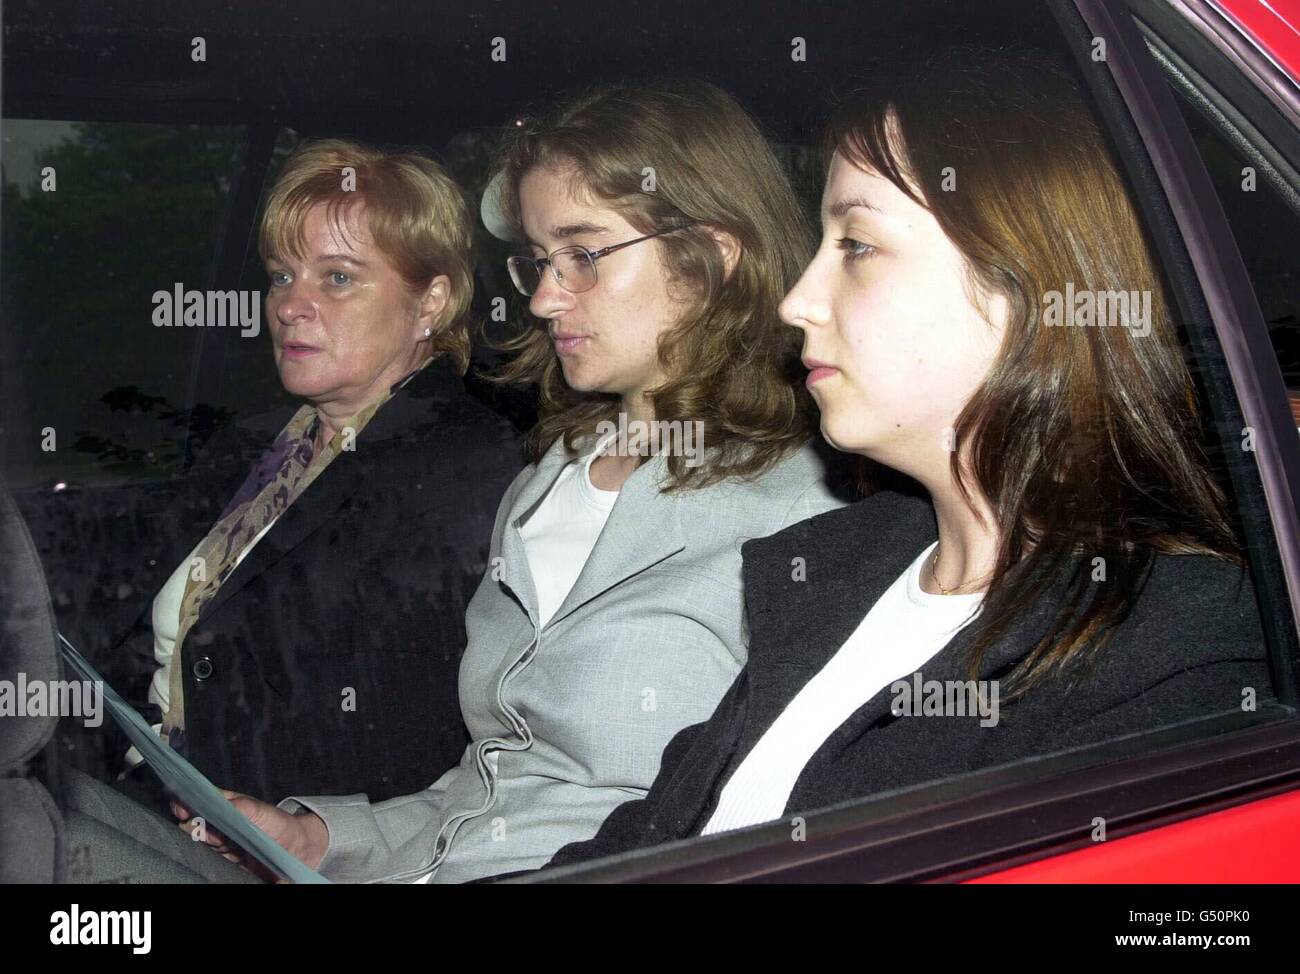 Karen Burke, centre, leaves Harlow Magistrates Court in Essex after she appeared in court in relation to an alleged assault on feminist writer and 61 year old academic Germaine Greer. * Burke 19, of Wollaton near Nottingham is accused of assault occasioning actual bodily harm and assaulting and detaining Ms Greer against her will. Miss Burke, a first year student at Bath University, was remanded on conditional bail until June 6. Stock Photo